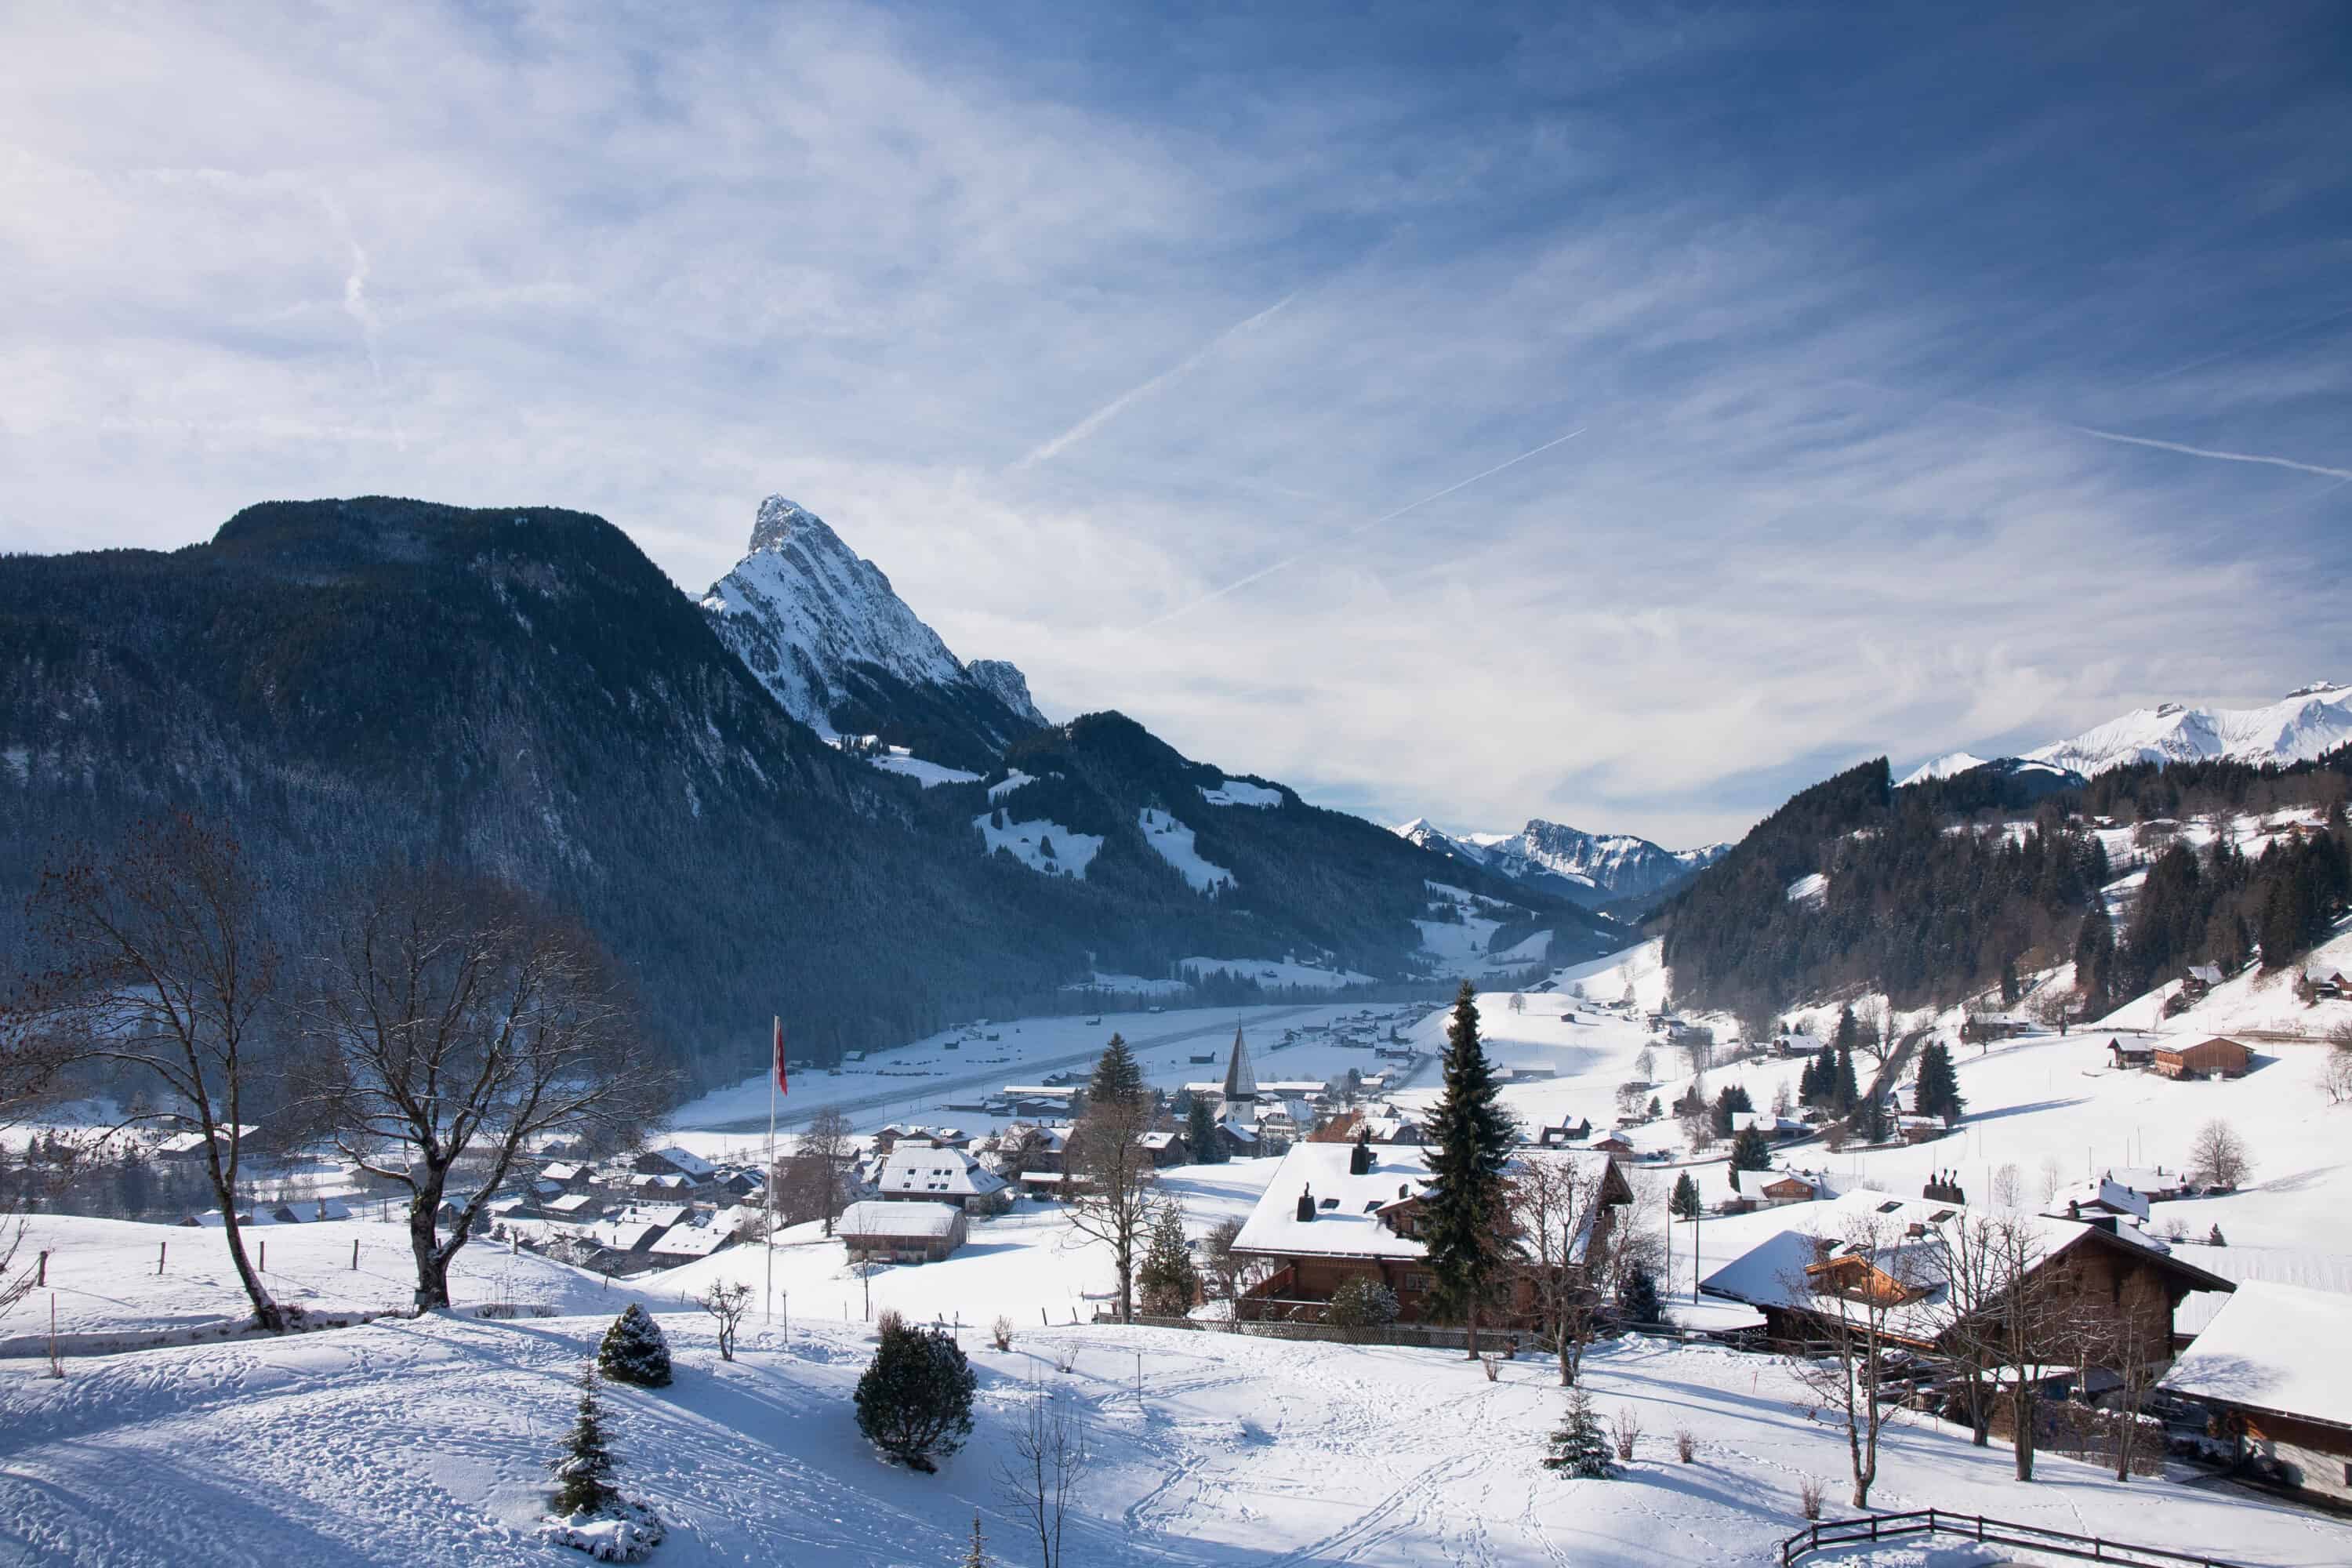 Landscape of Gstaad in Switzerland with snow in the winter.